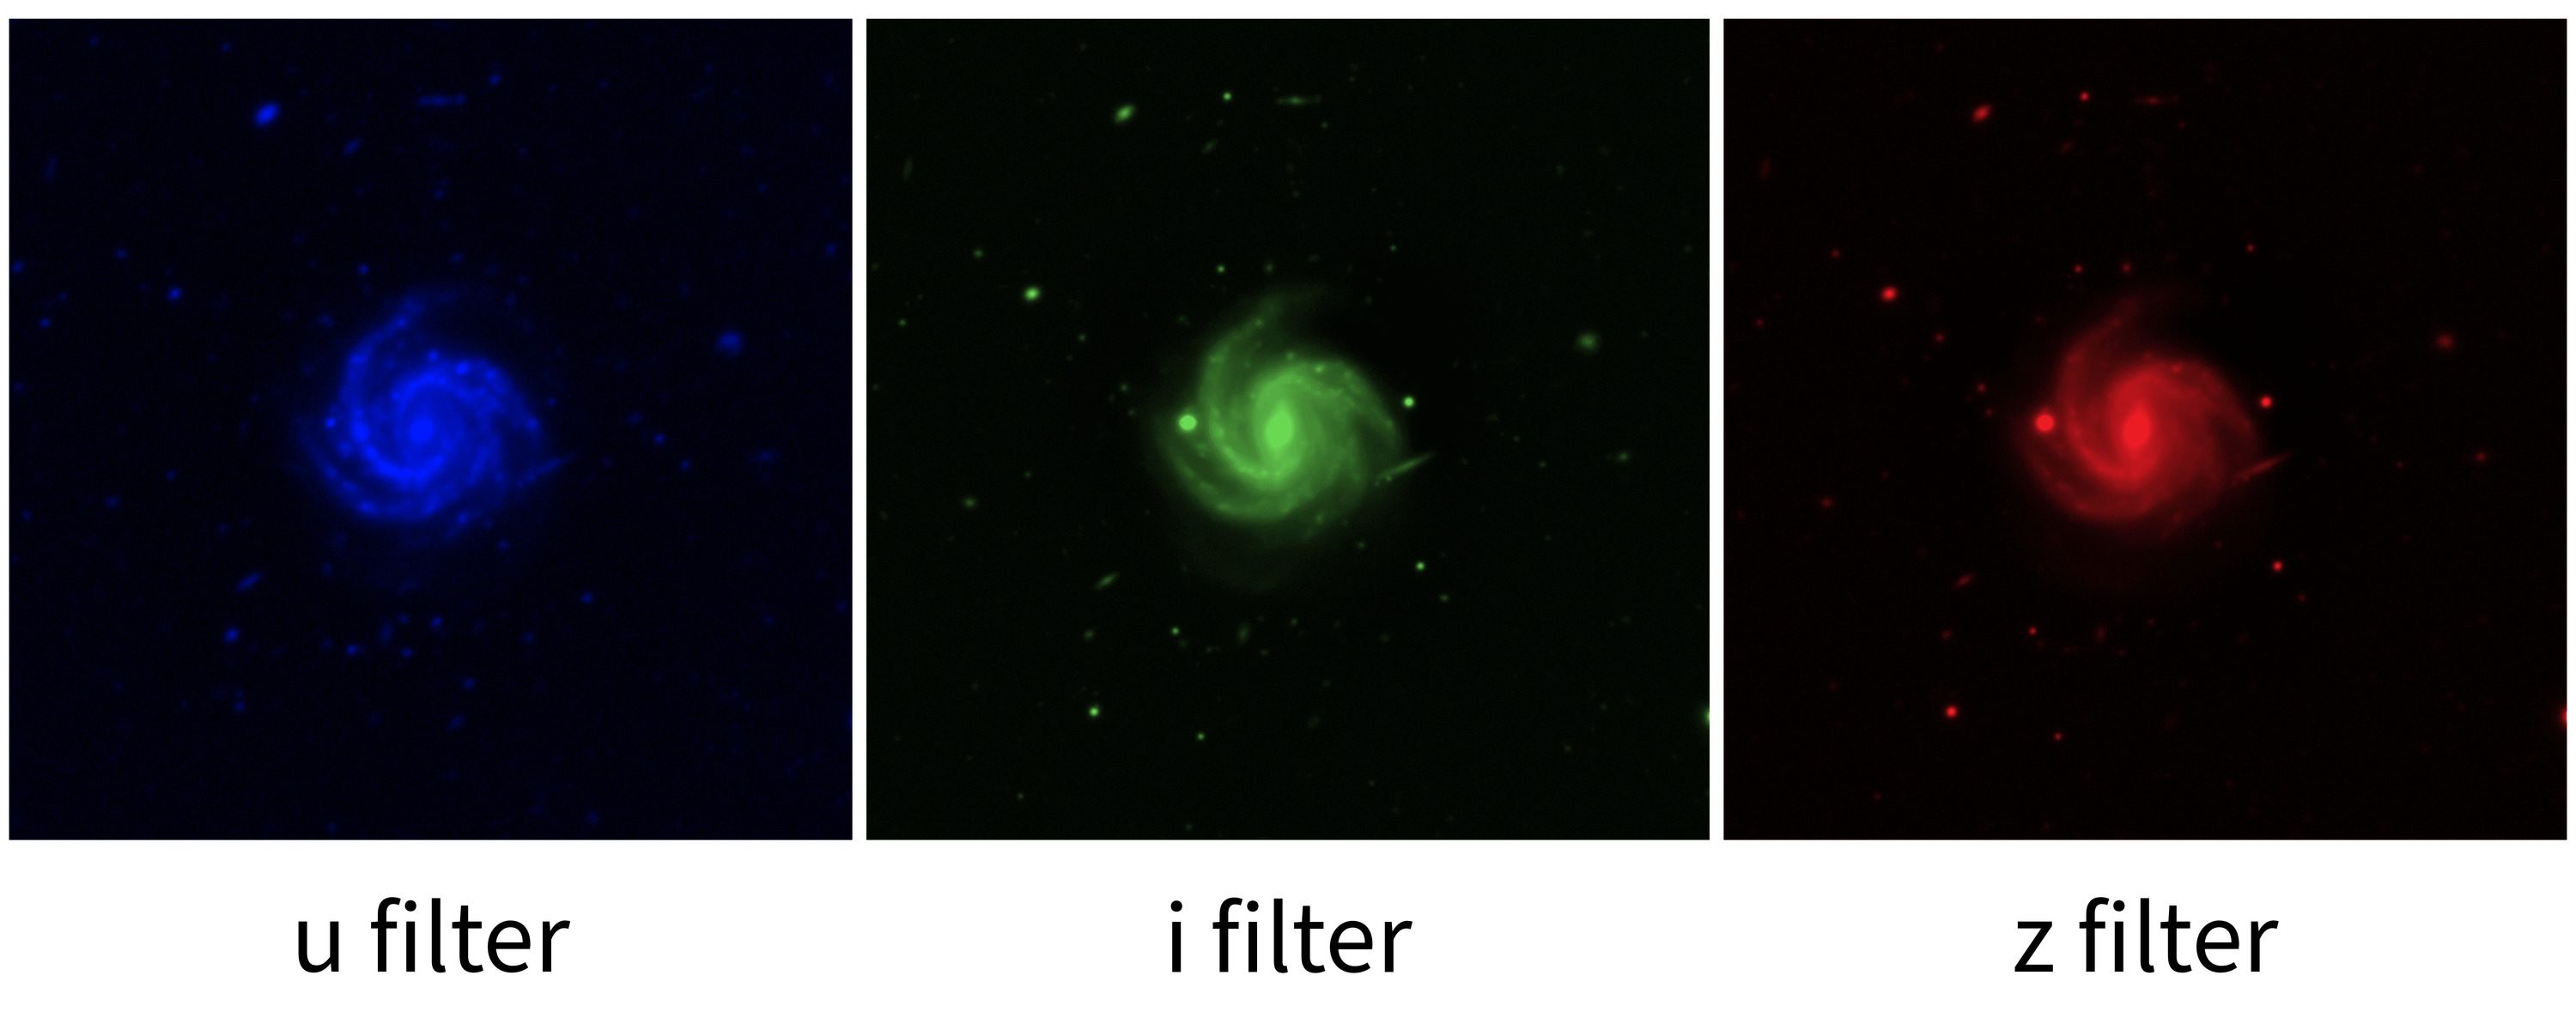 Spiral galaxy image in colorized u, i, and z filters